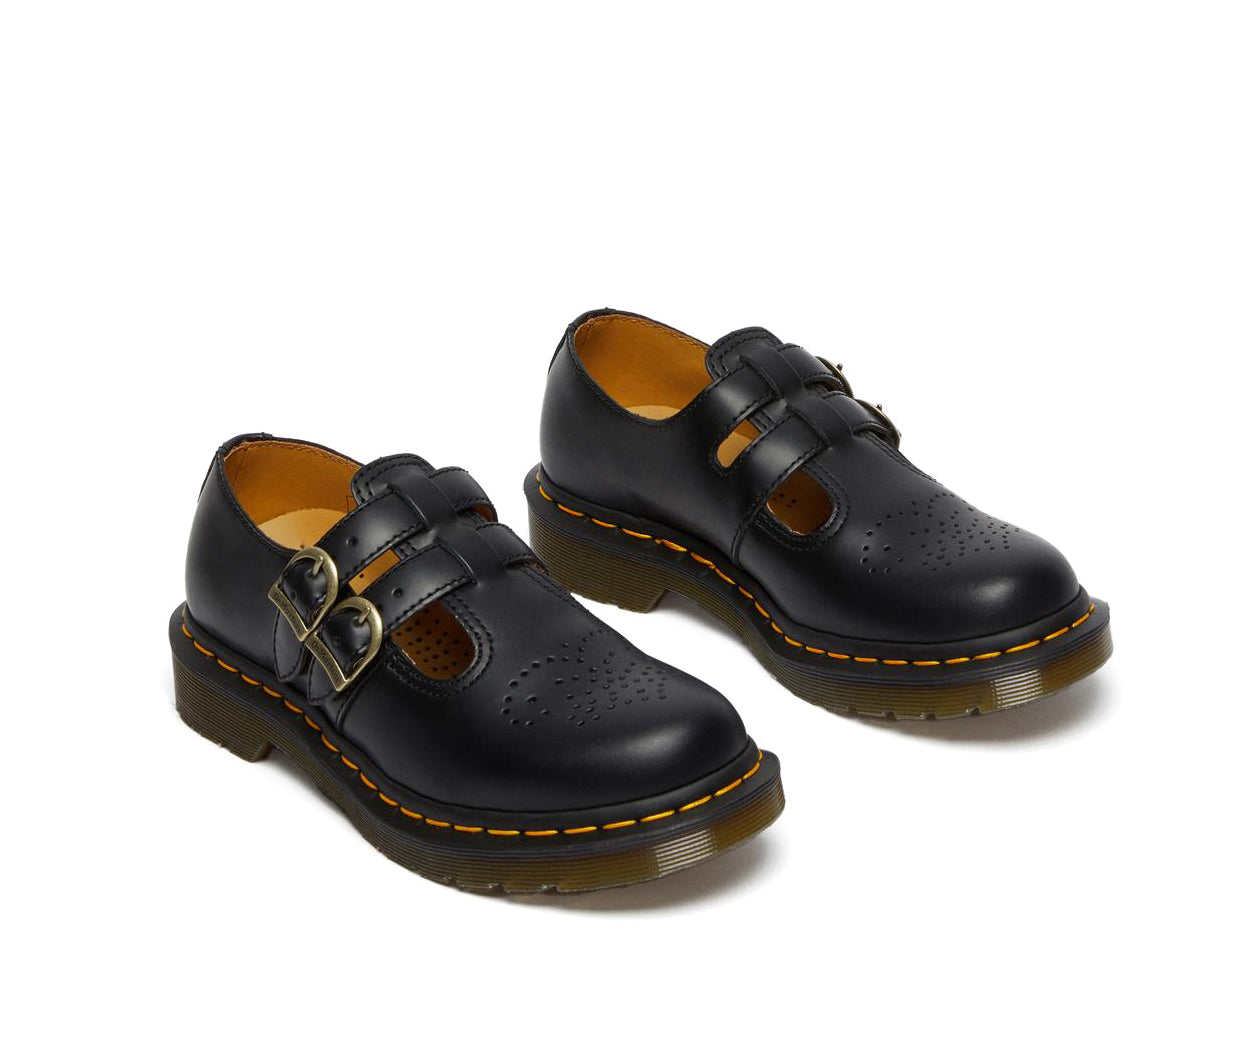 A black leather Dr. Martens mary jane shoe with brass buckles.